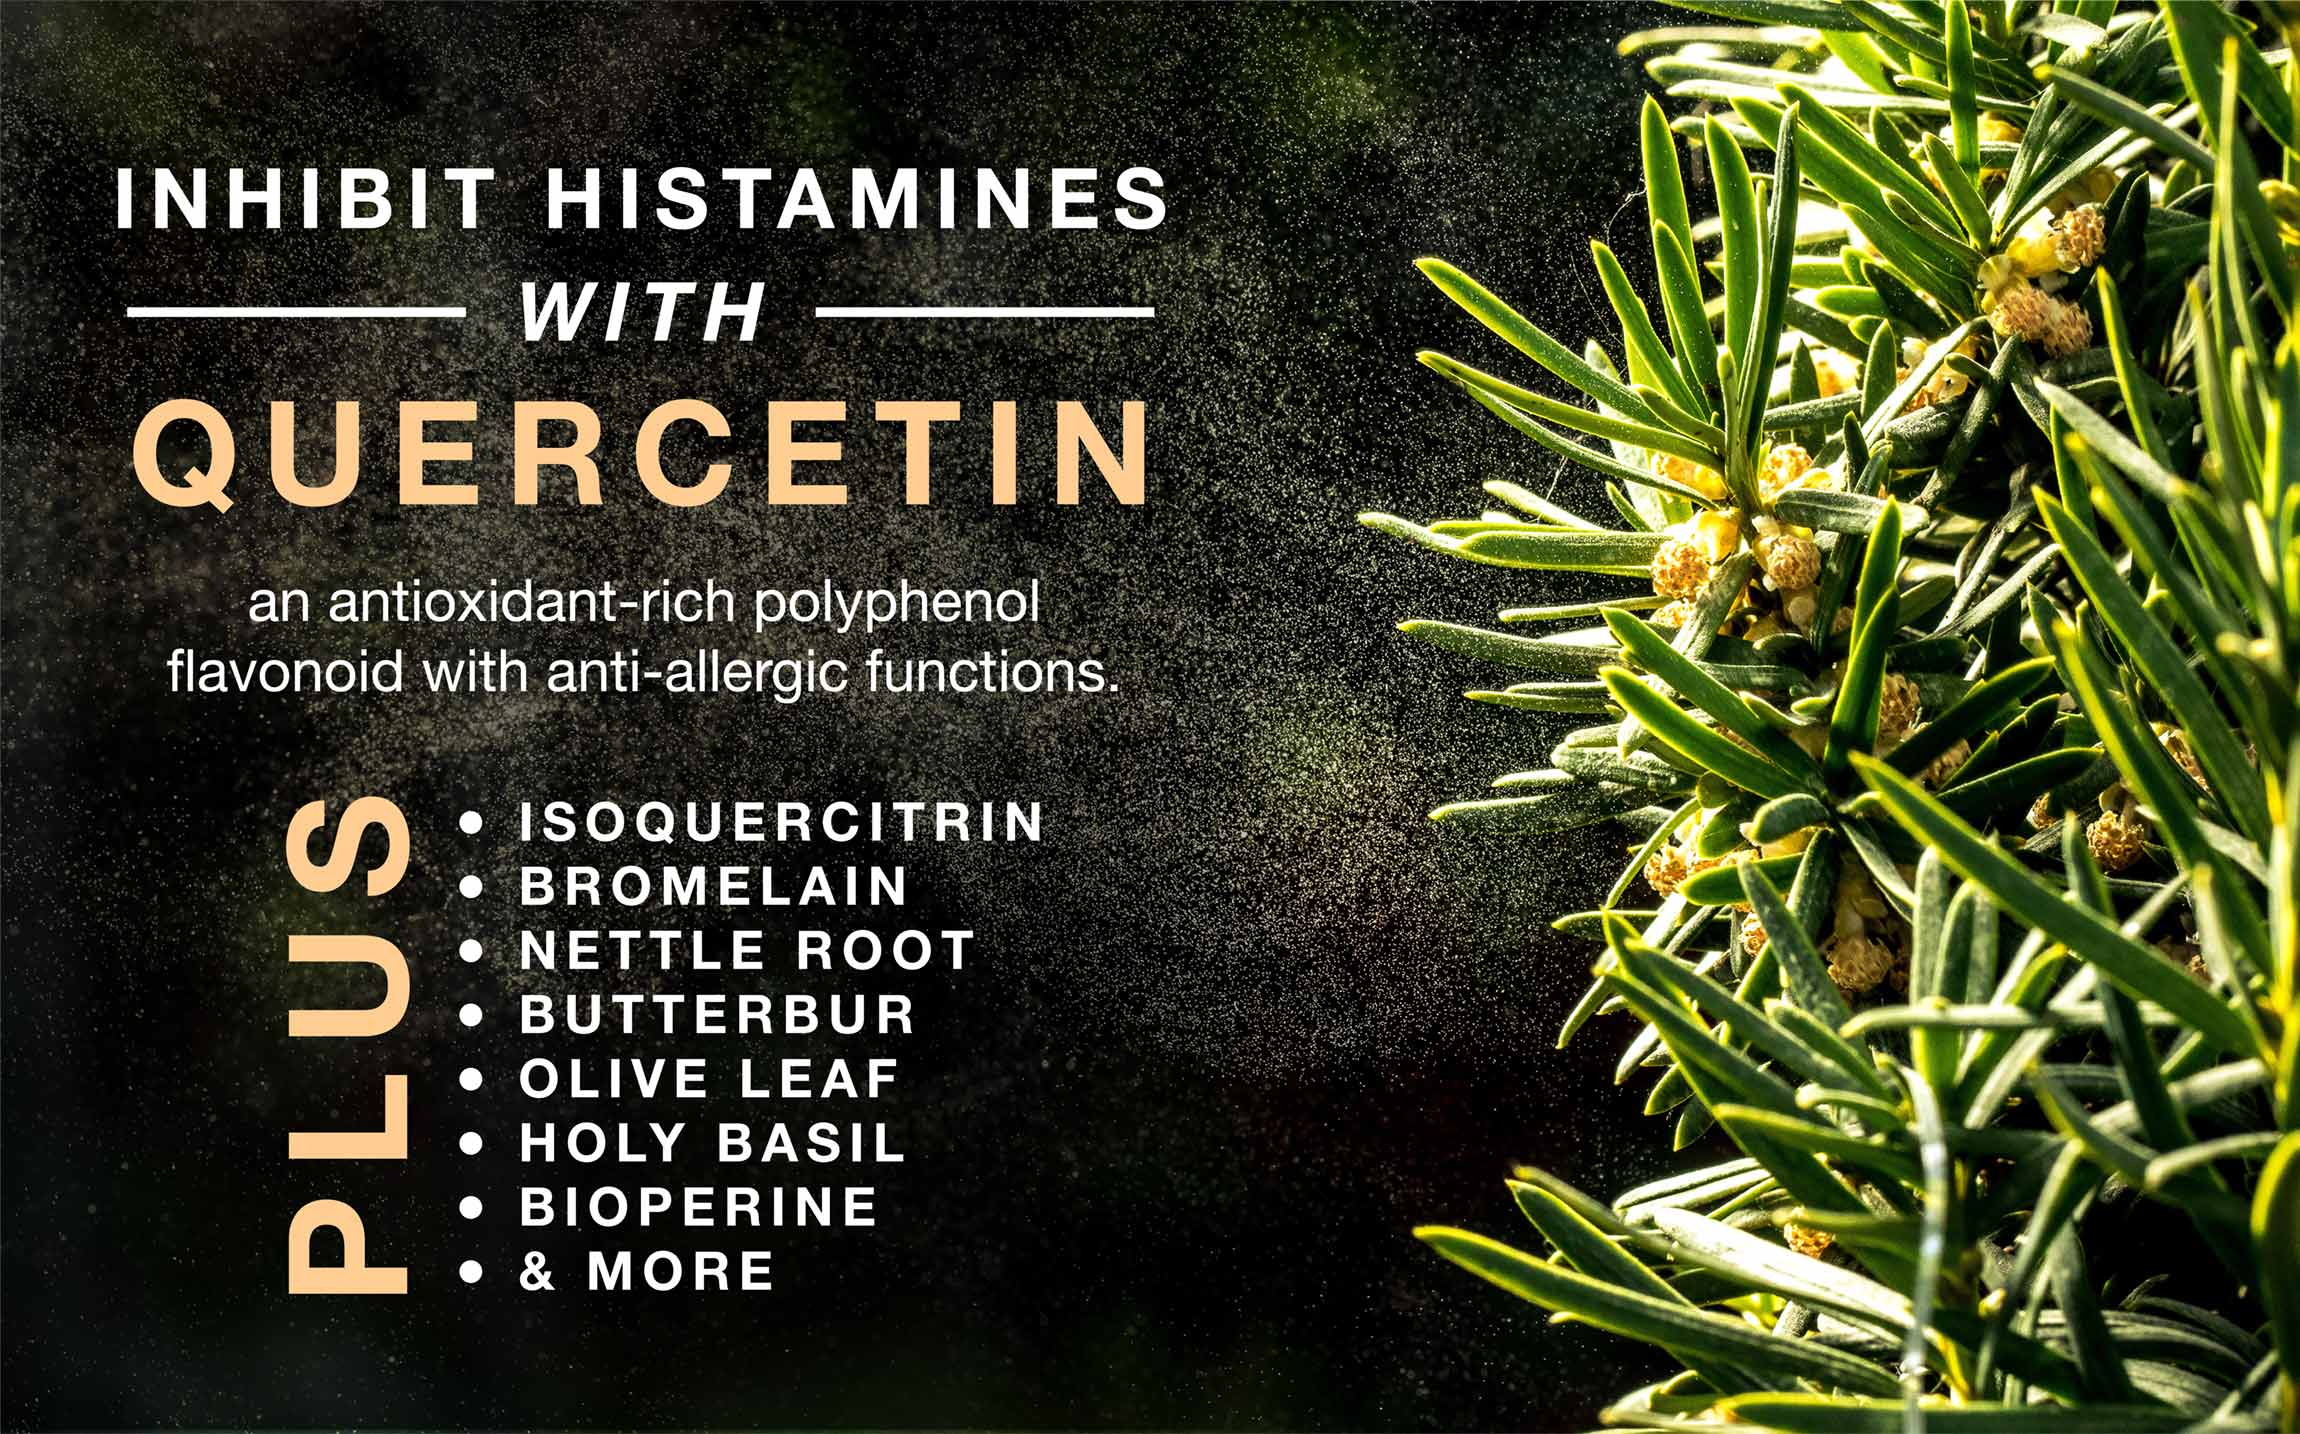 Inhibit histamines with Quercetin, an antioxidant-rich polyphenol flavonoid with anti-allergic functions.